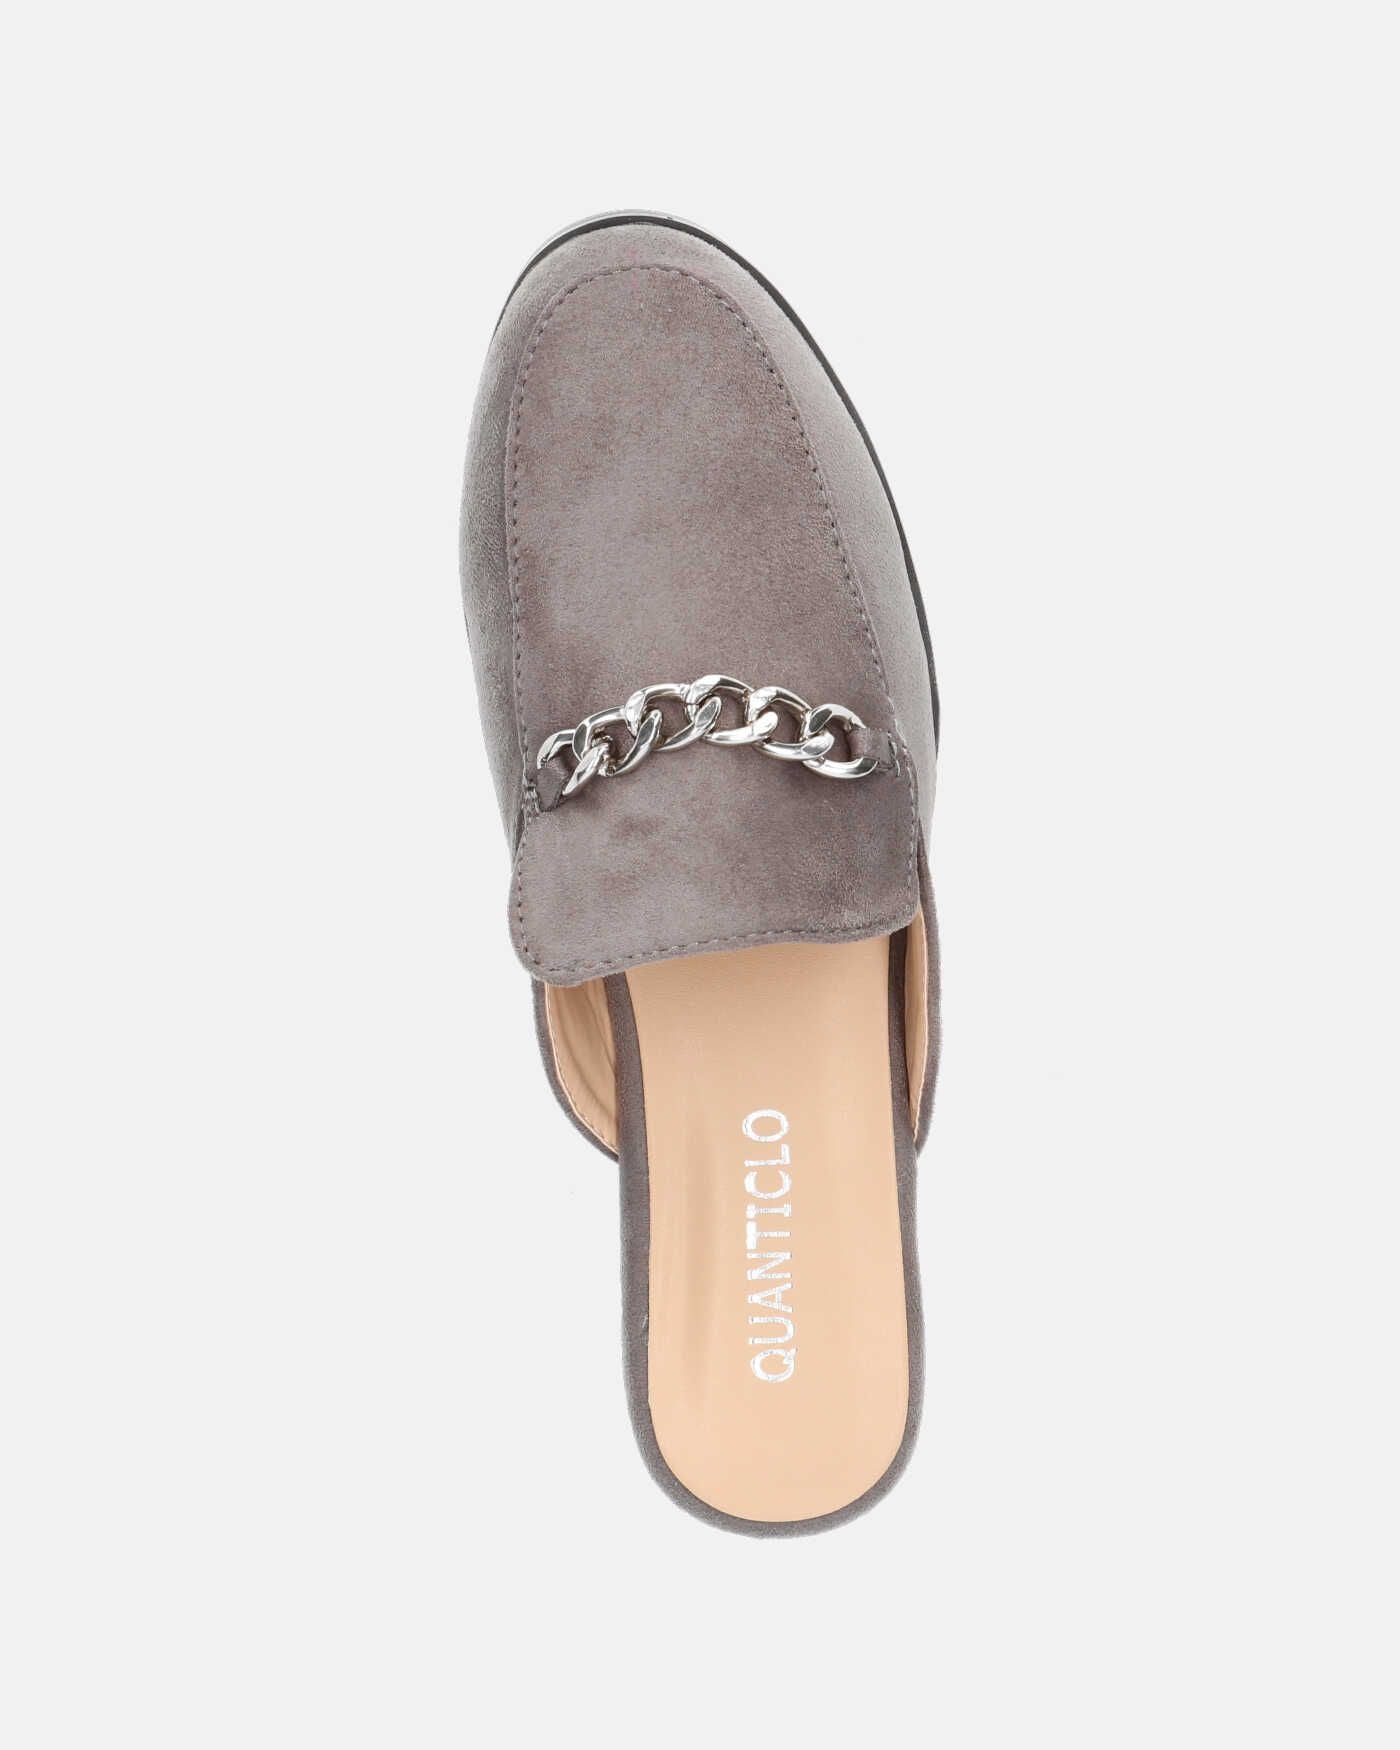 SHELLEY - grey moccasins with beige sole